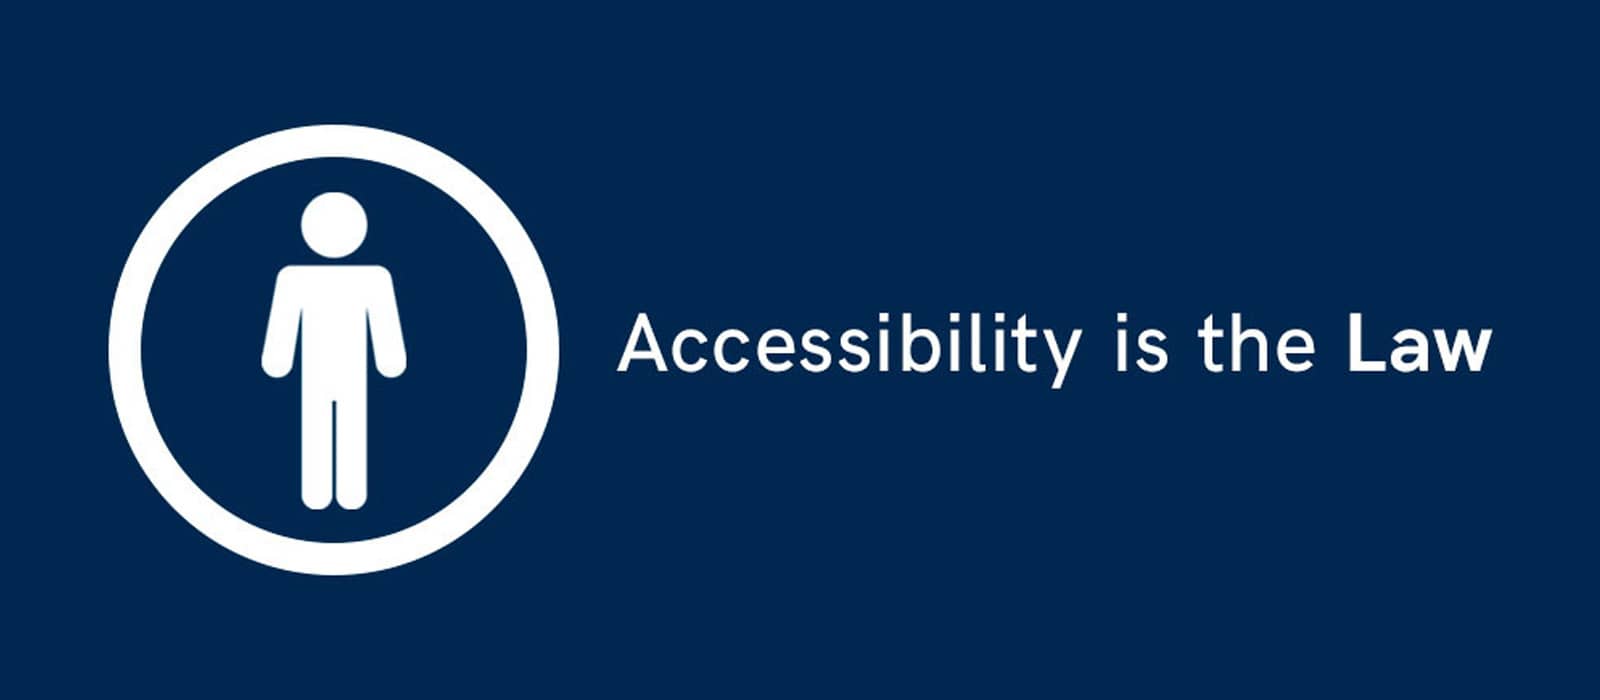 A logo containing "Accessibility is the law" (Image via PixelPlex)